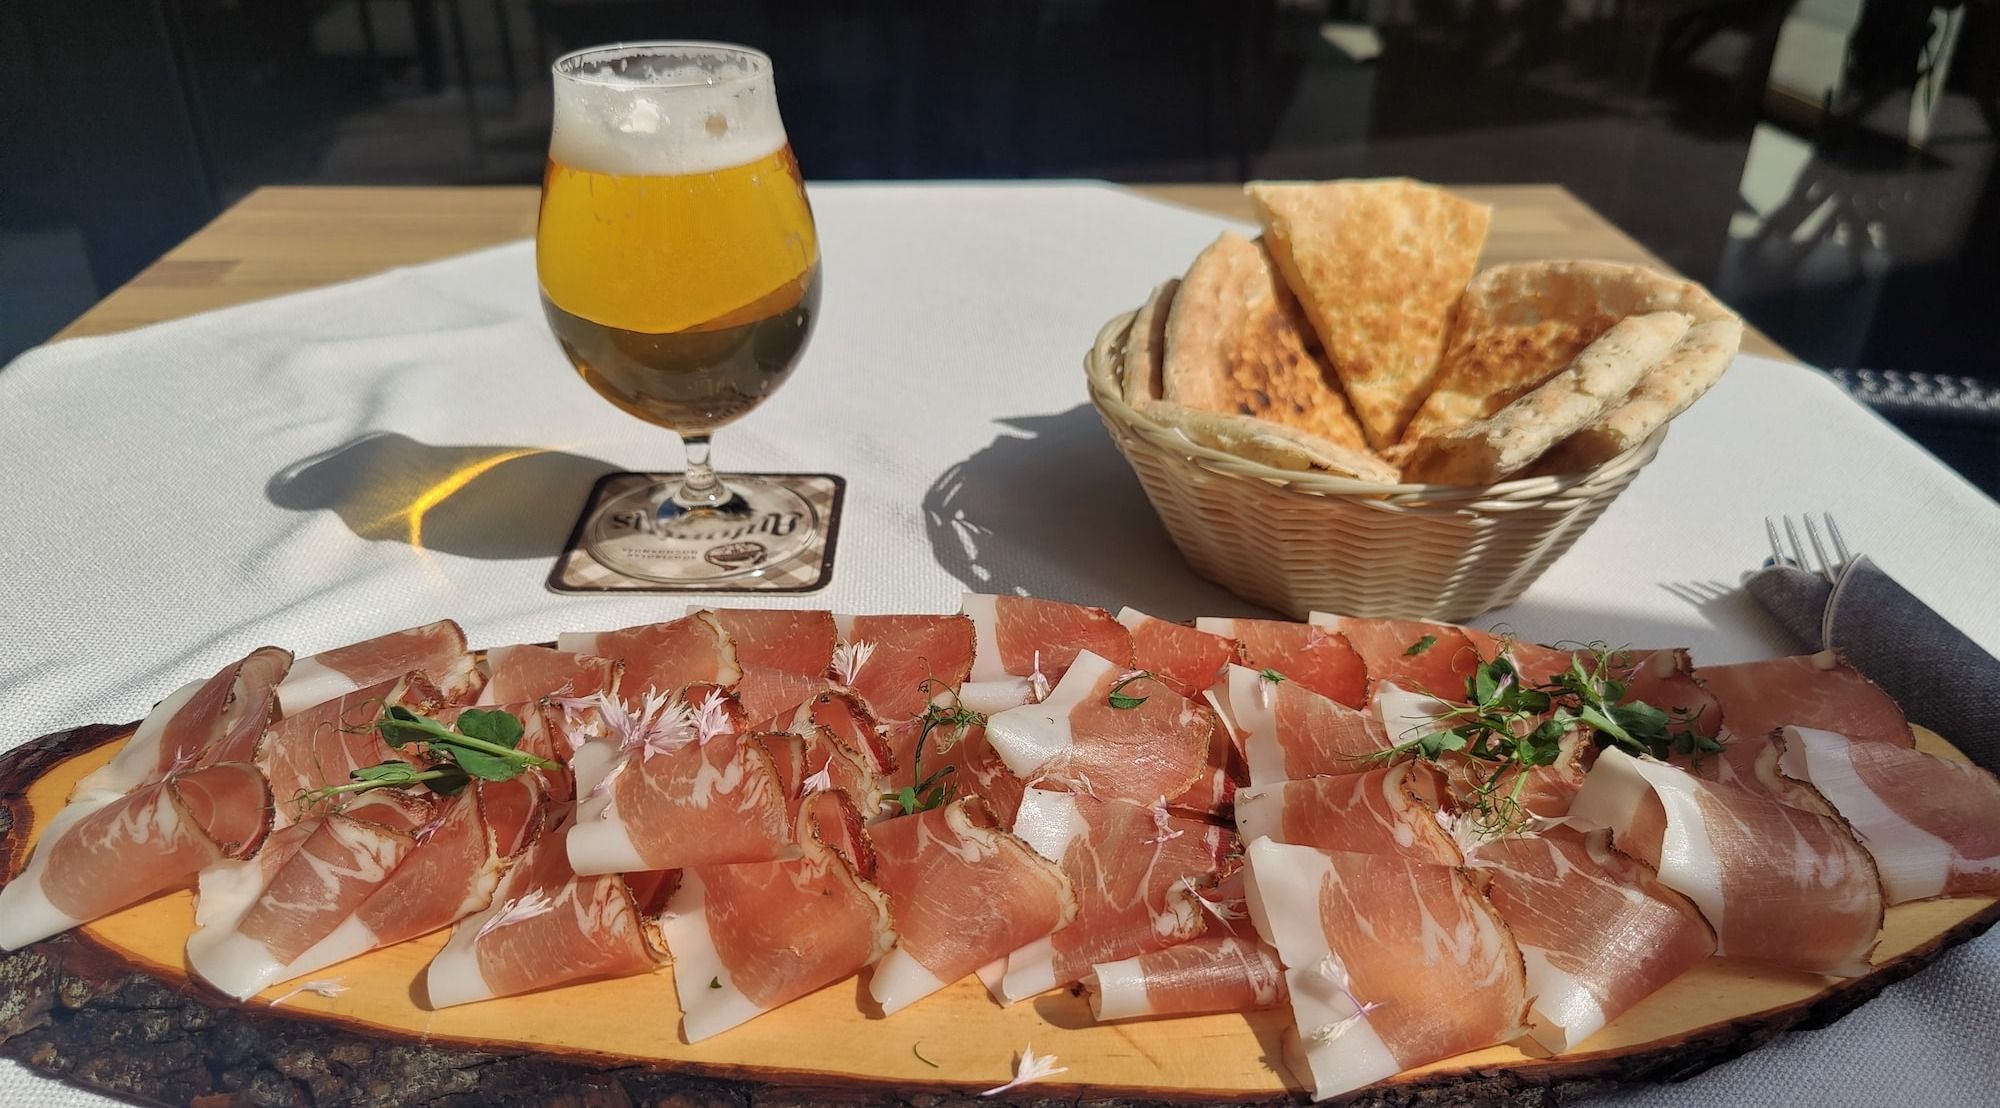 a platter of prosciutto, cheese and crackers on a table